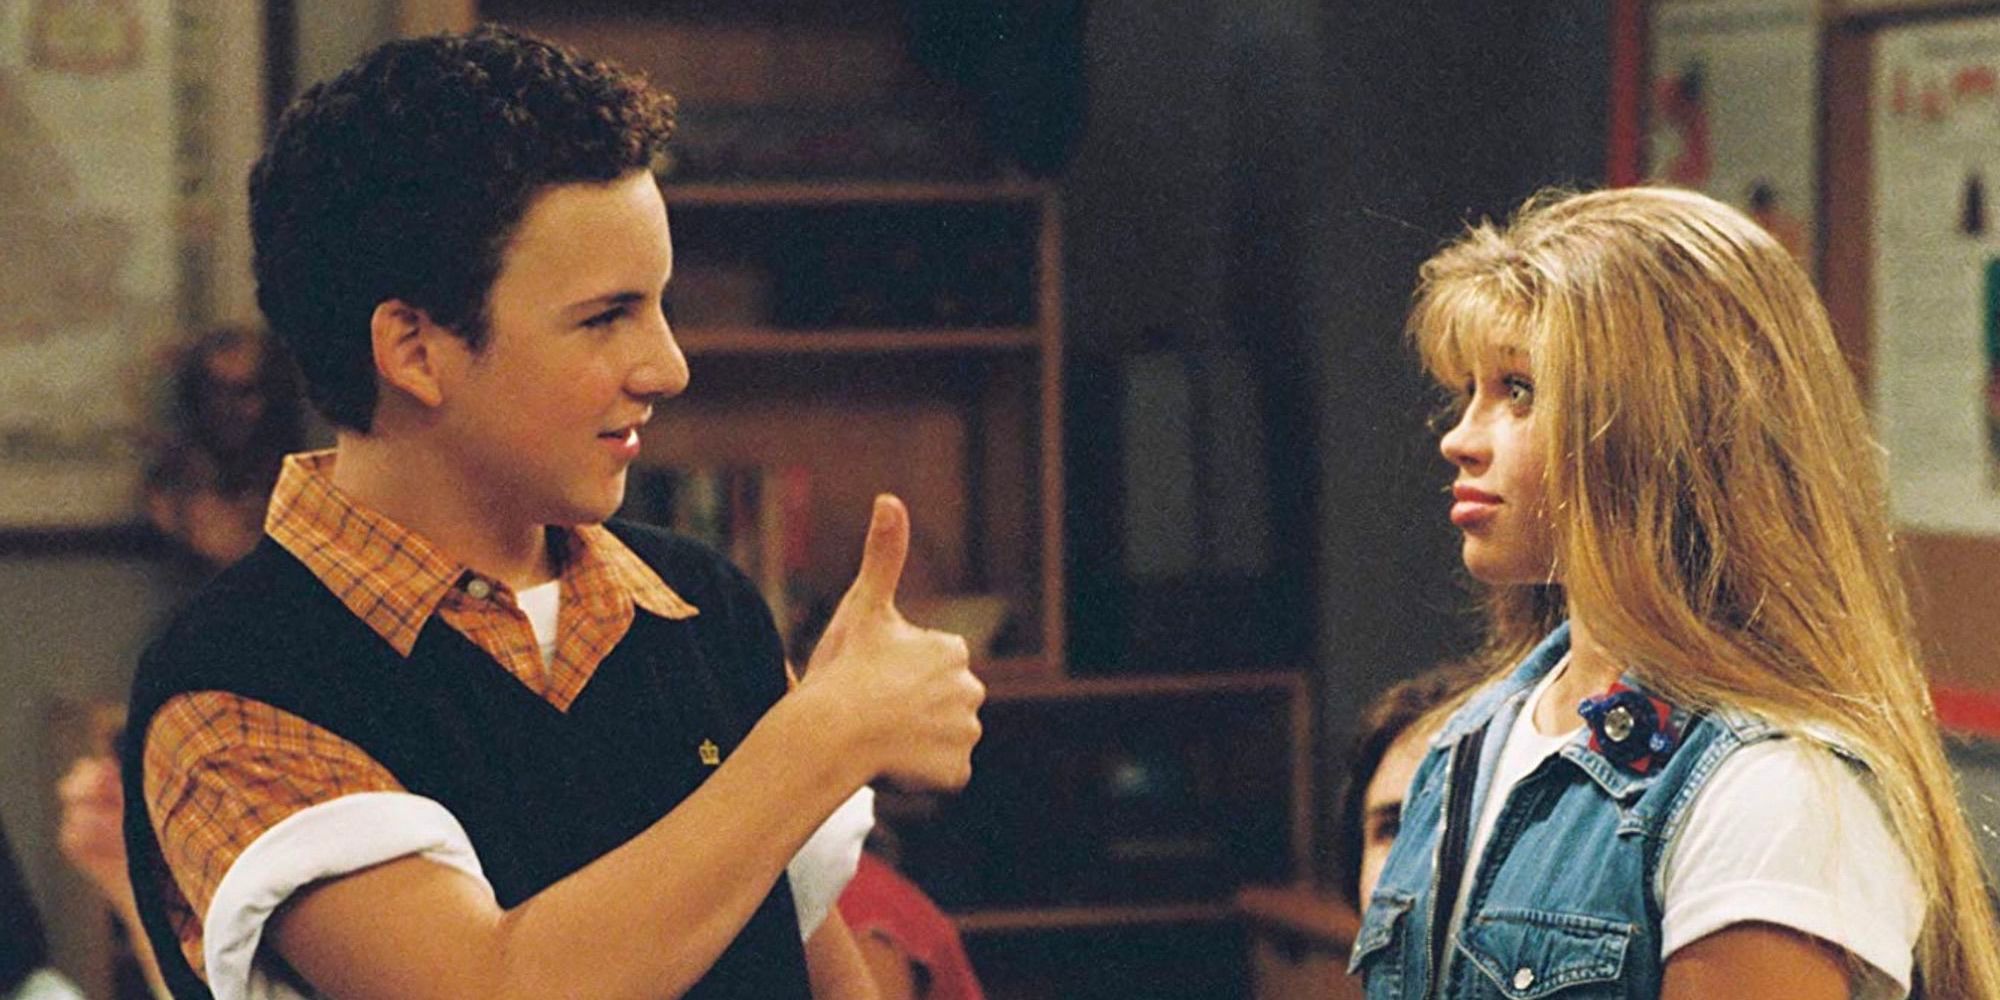 Ben Savage as Cory and Danielle Fishell as Topanga write letters